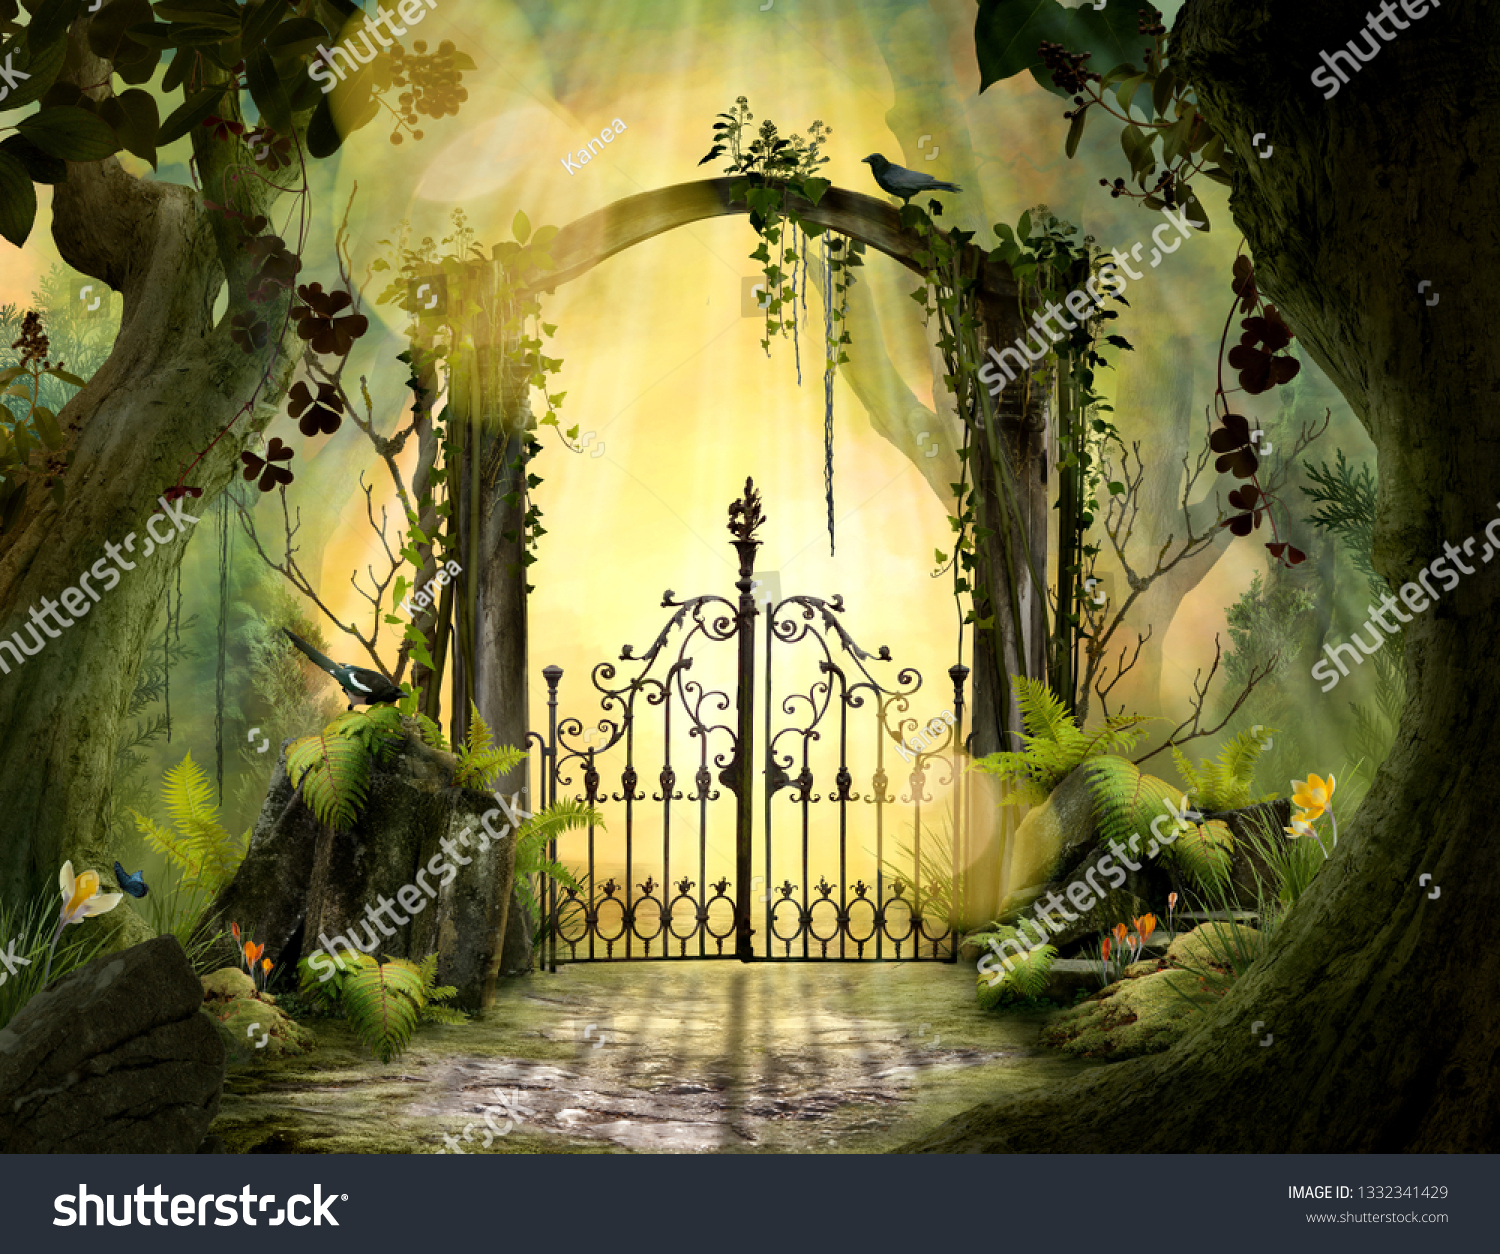 Archway in an enchanted garden Landscape with big old trees #1332341429